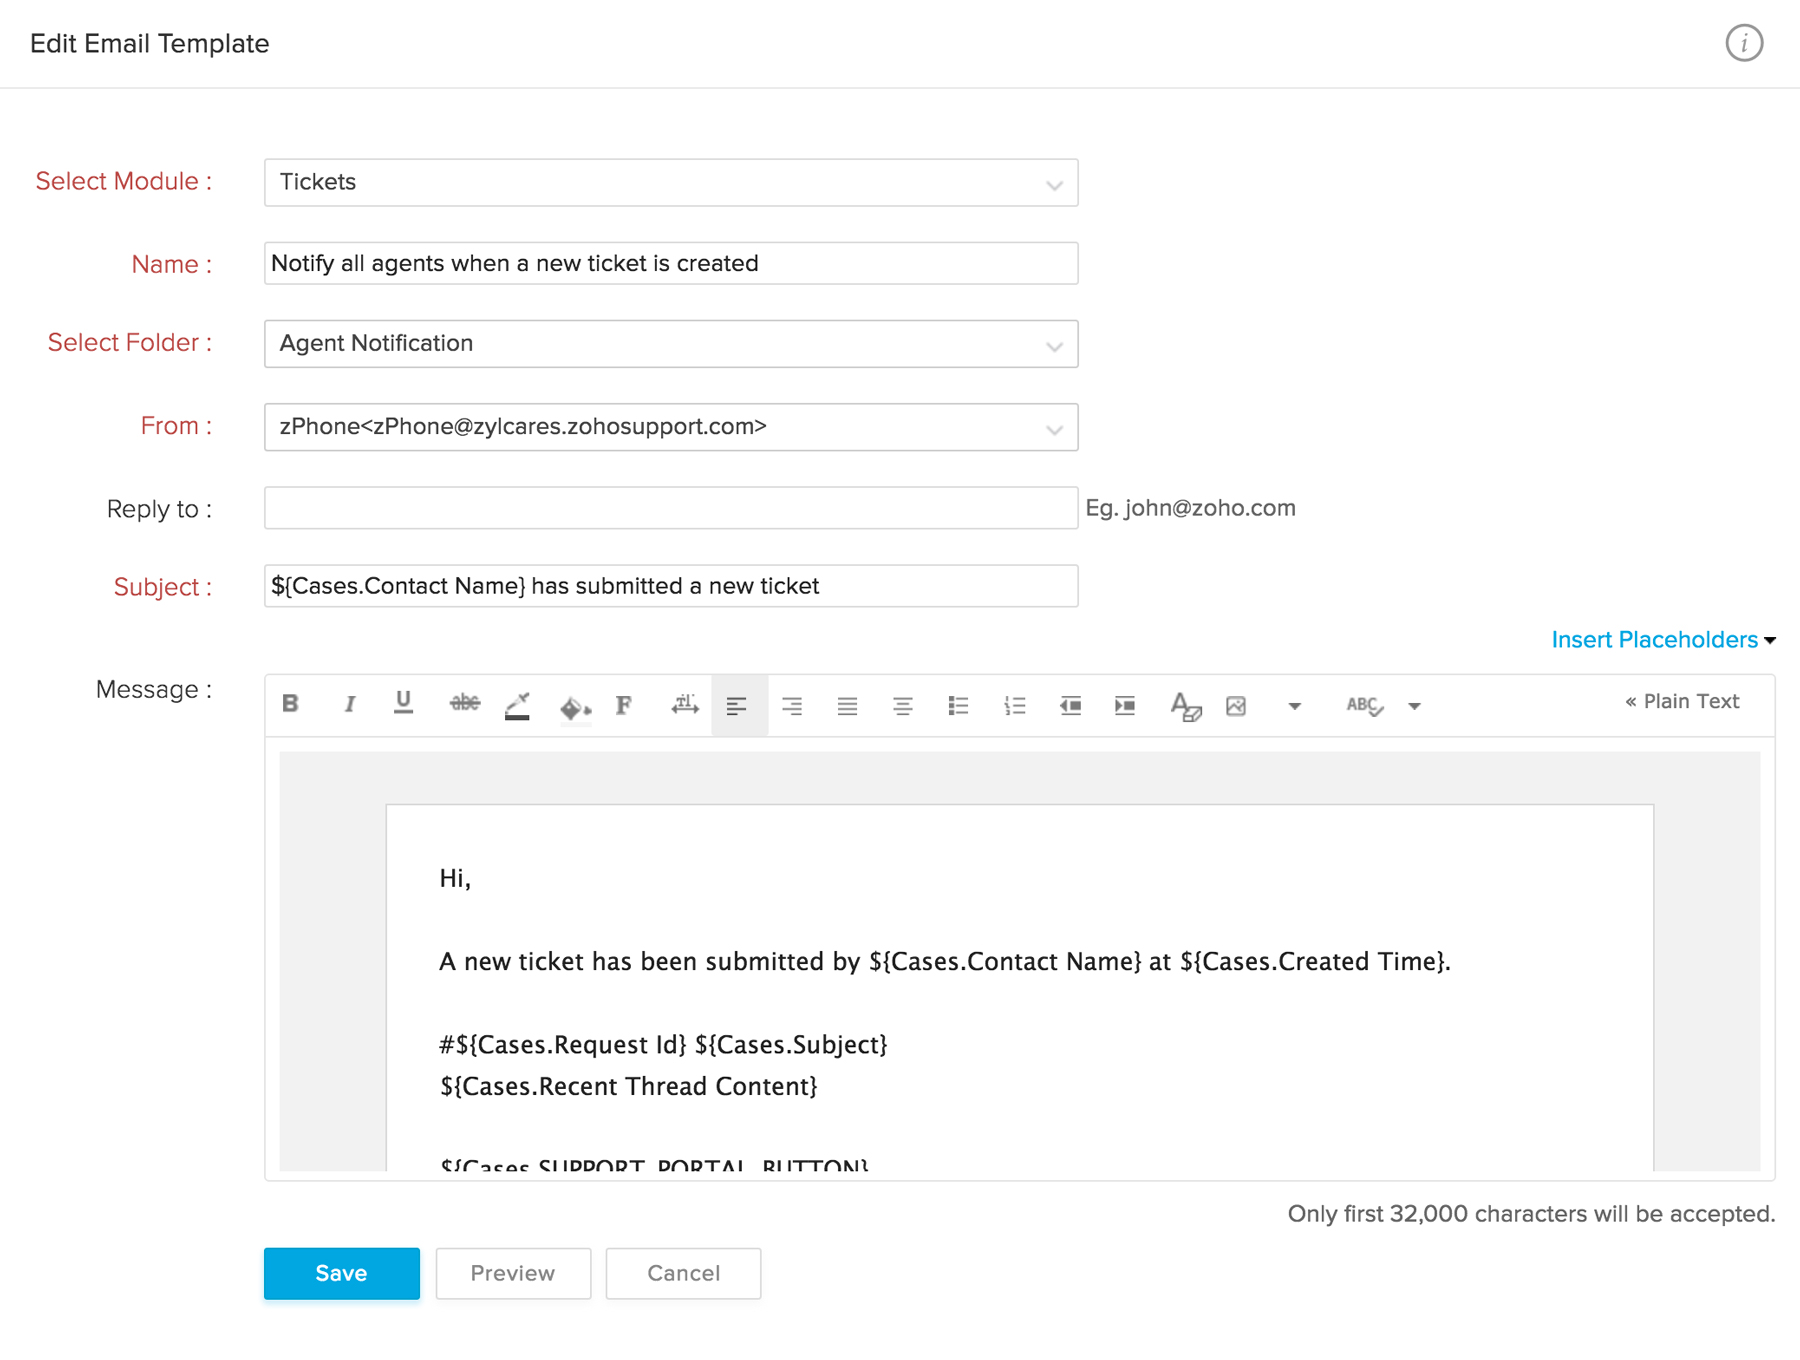 Email Templates in Zoho Desk